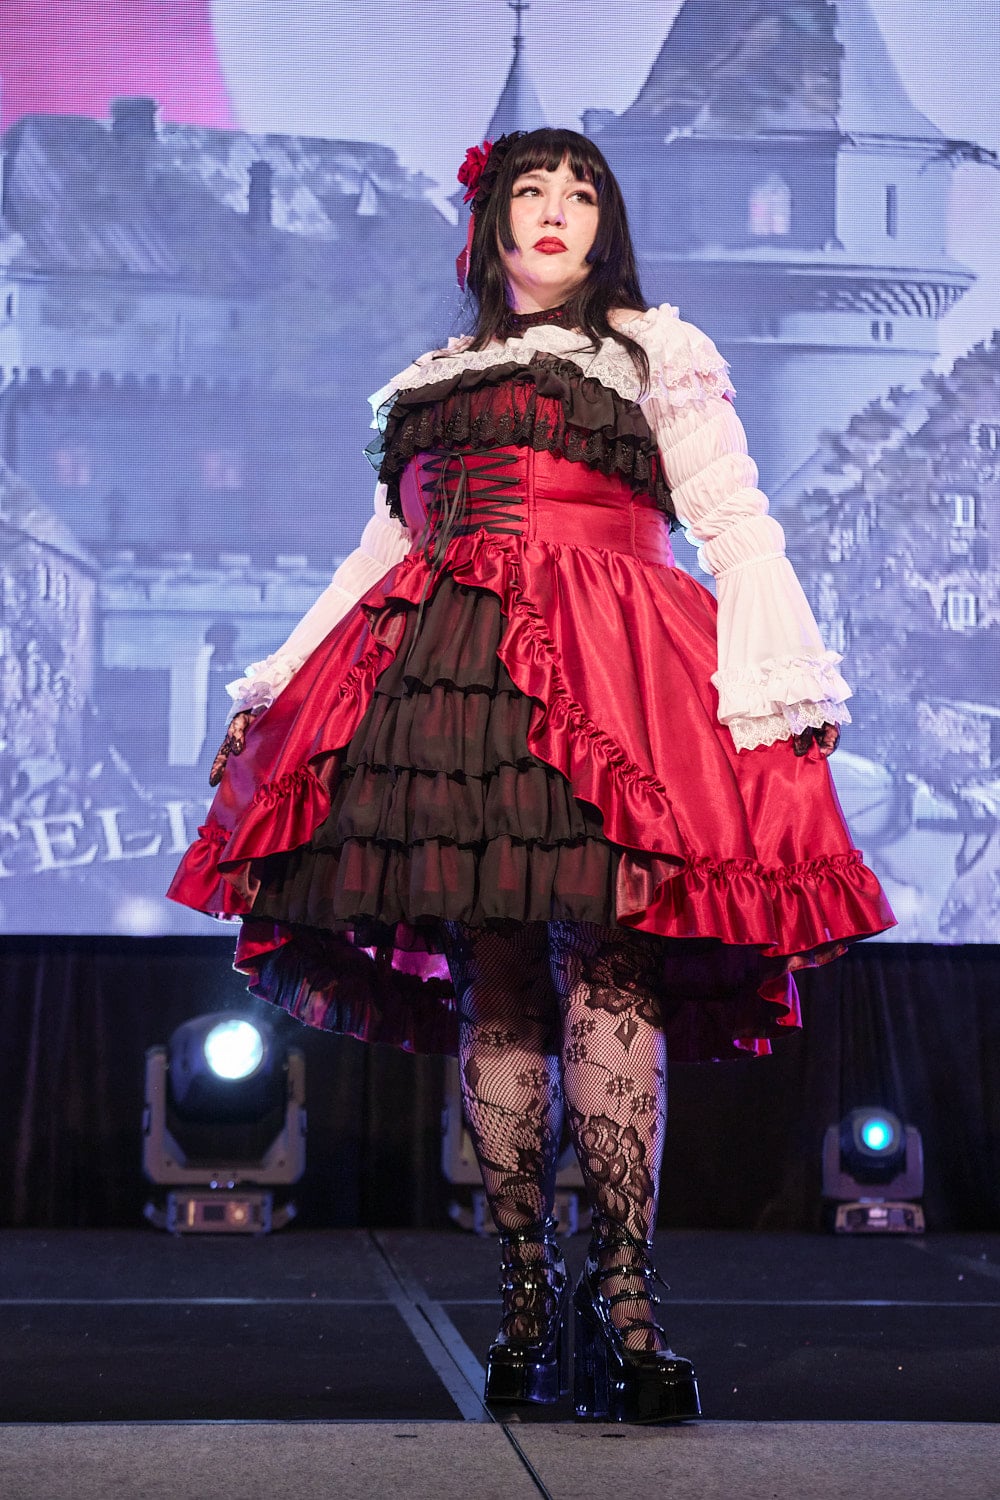 Plus size gothic lolita wearing red and black shantung bustle dress with white princess sleeve blouse, lace tights, and black shoes - full body 2.